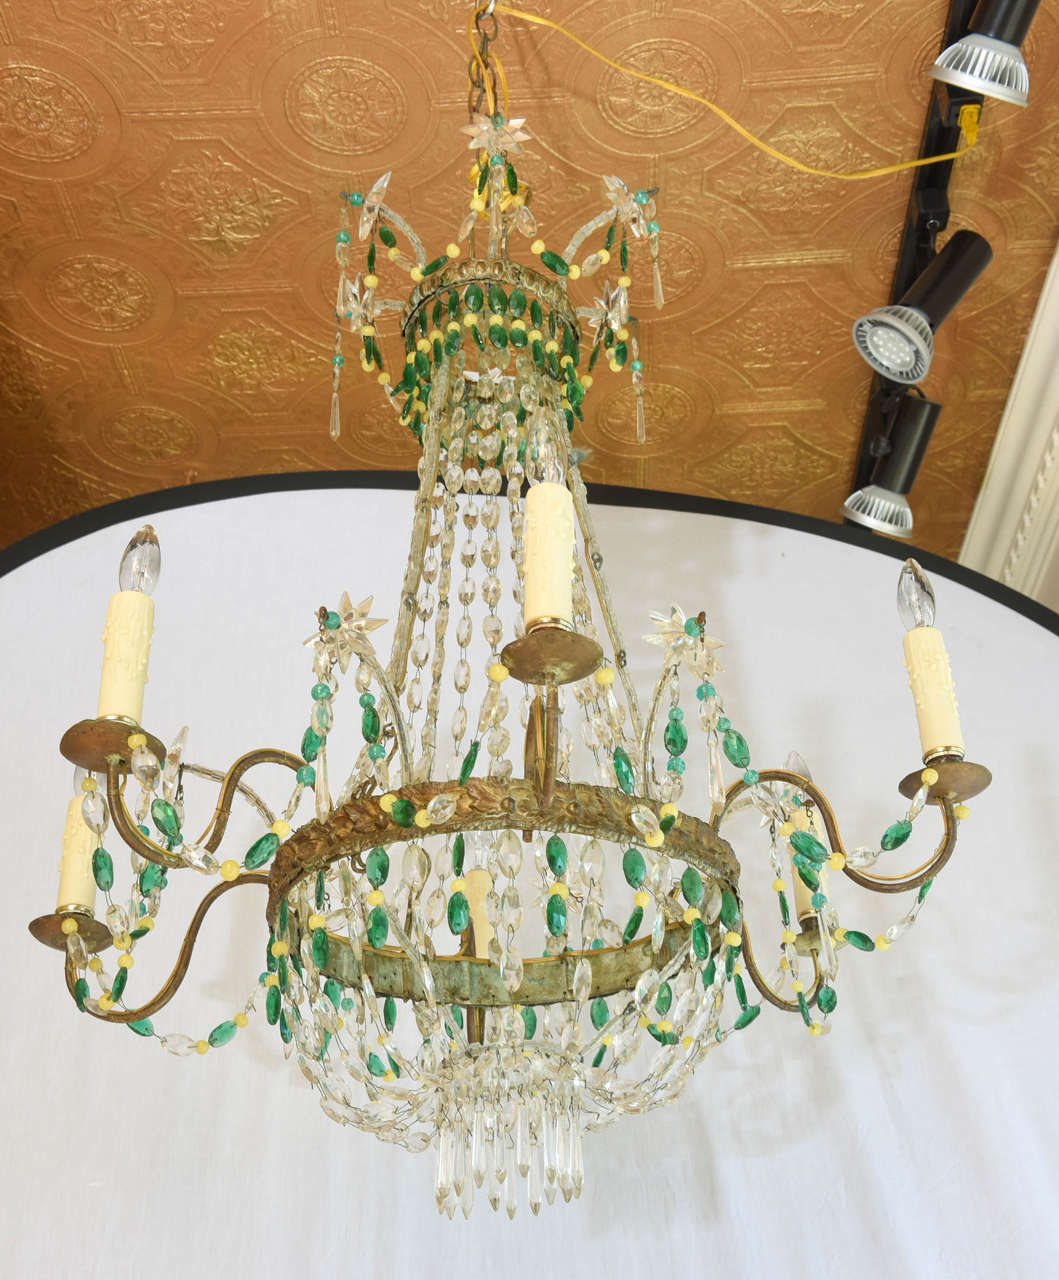 Unusual chandelier, having six-lights on S-scroll gilded iron candlearms, affixed to repousse band, hung from swagging strings of faceted oval crystals, finishing in a basket, surmounted by two-tiered crown, decorated with whimsical starburst